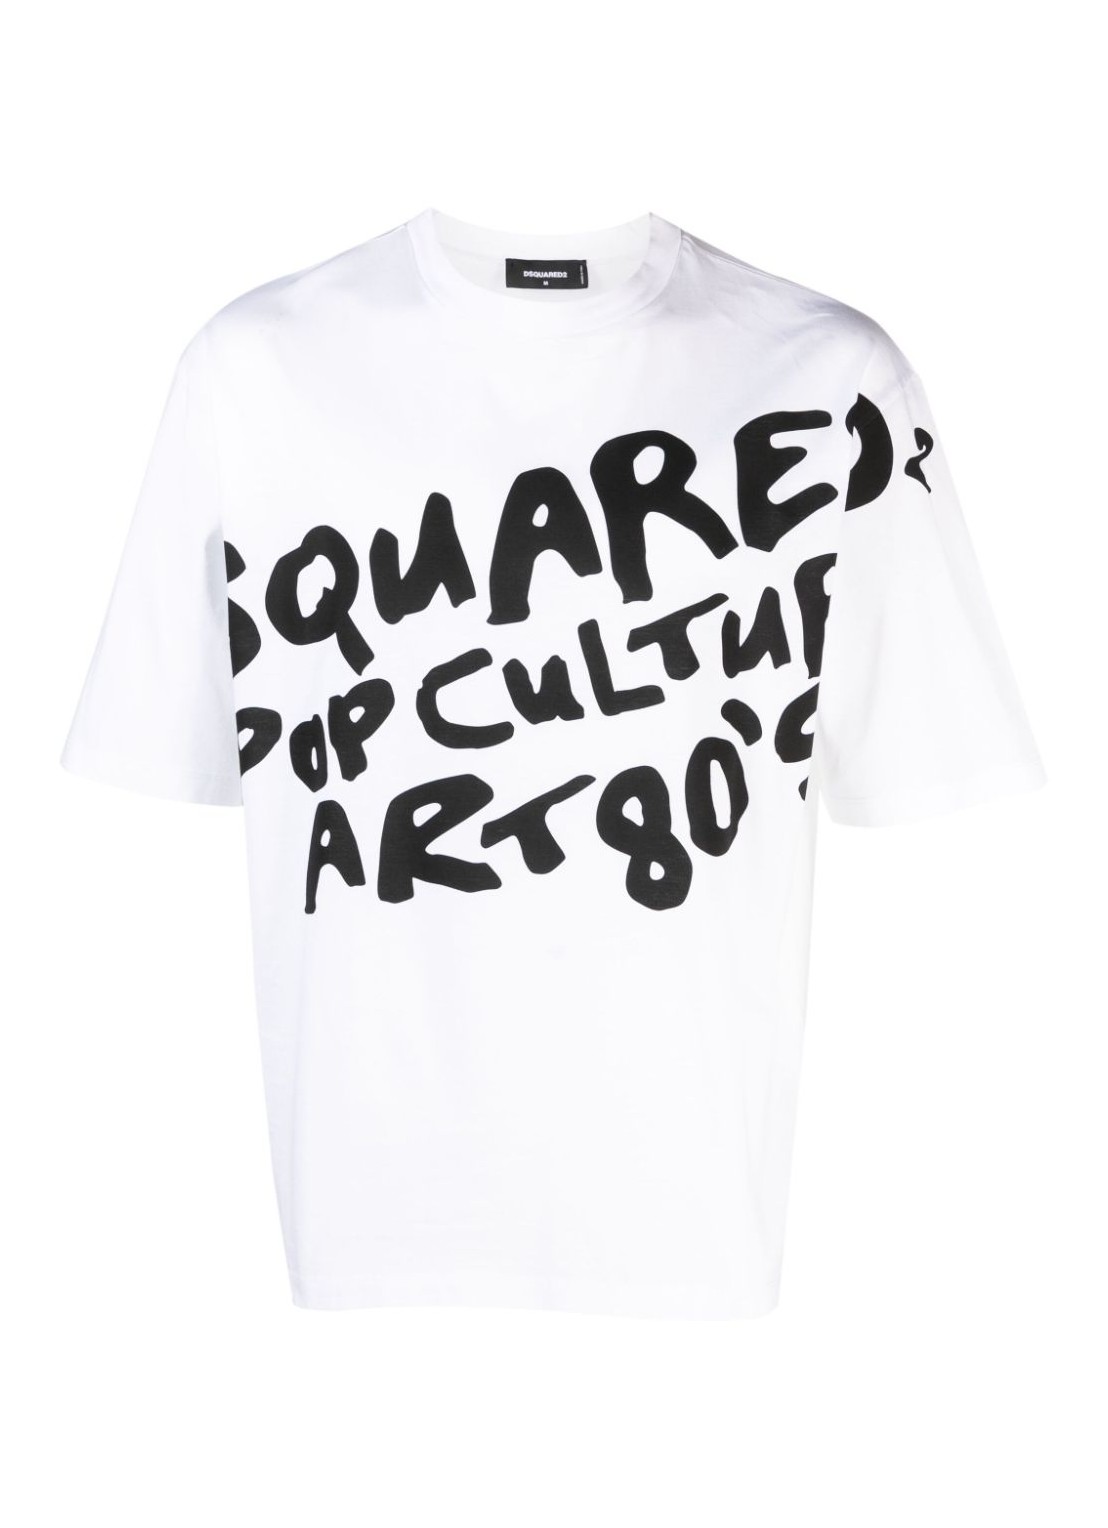 Camiseta dsquared t-shirt man d2 pop 80's loose fit tee s74gd1238s23009 100 talla blanco
 